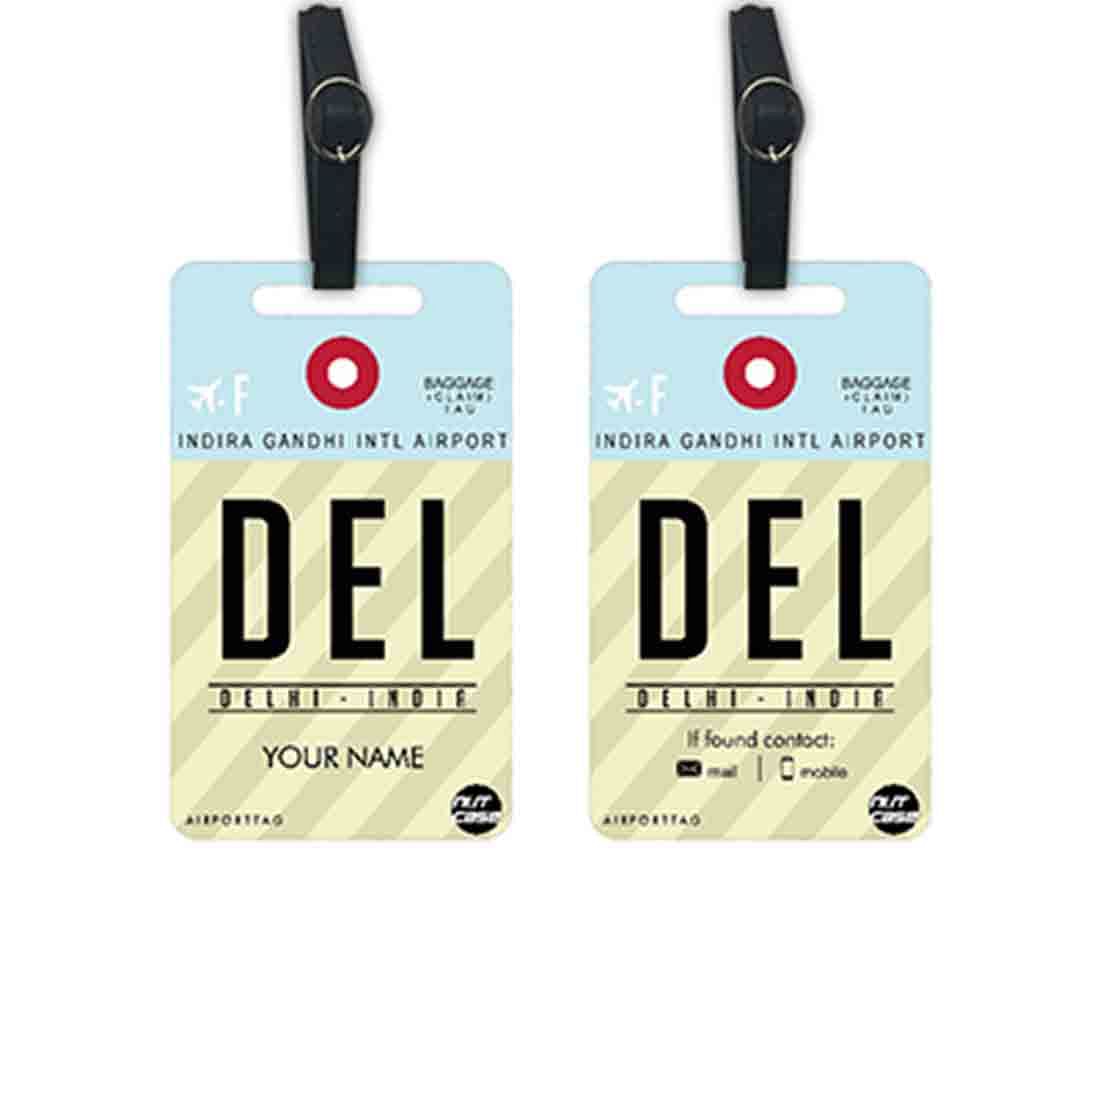 Classy Personalized Luggage Tag - Add your Name - Set of 2 Nutcase